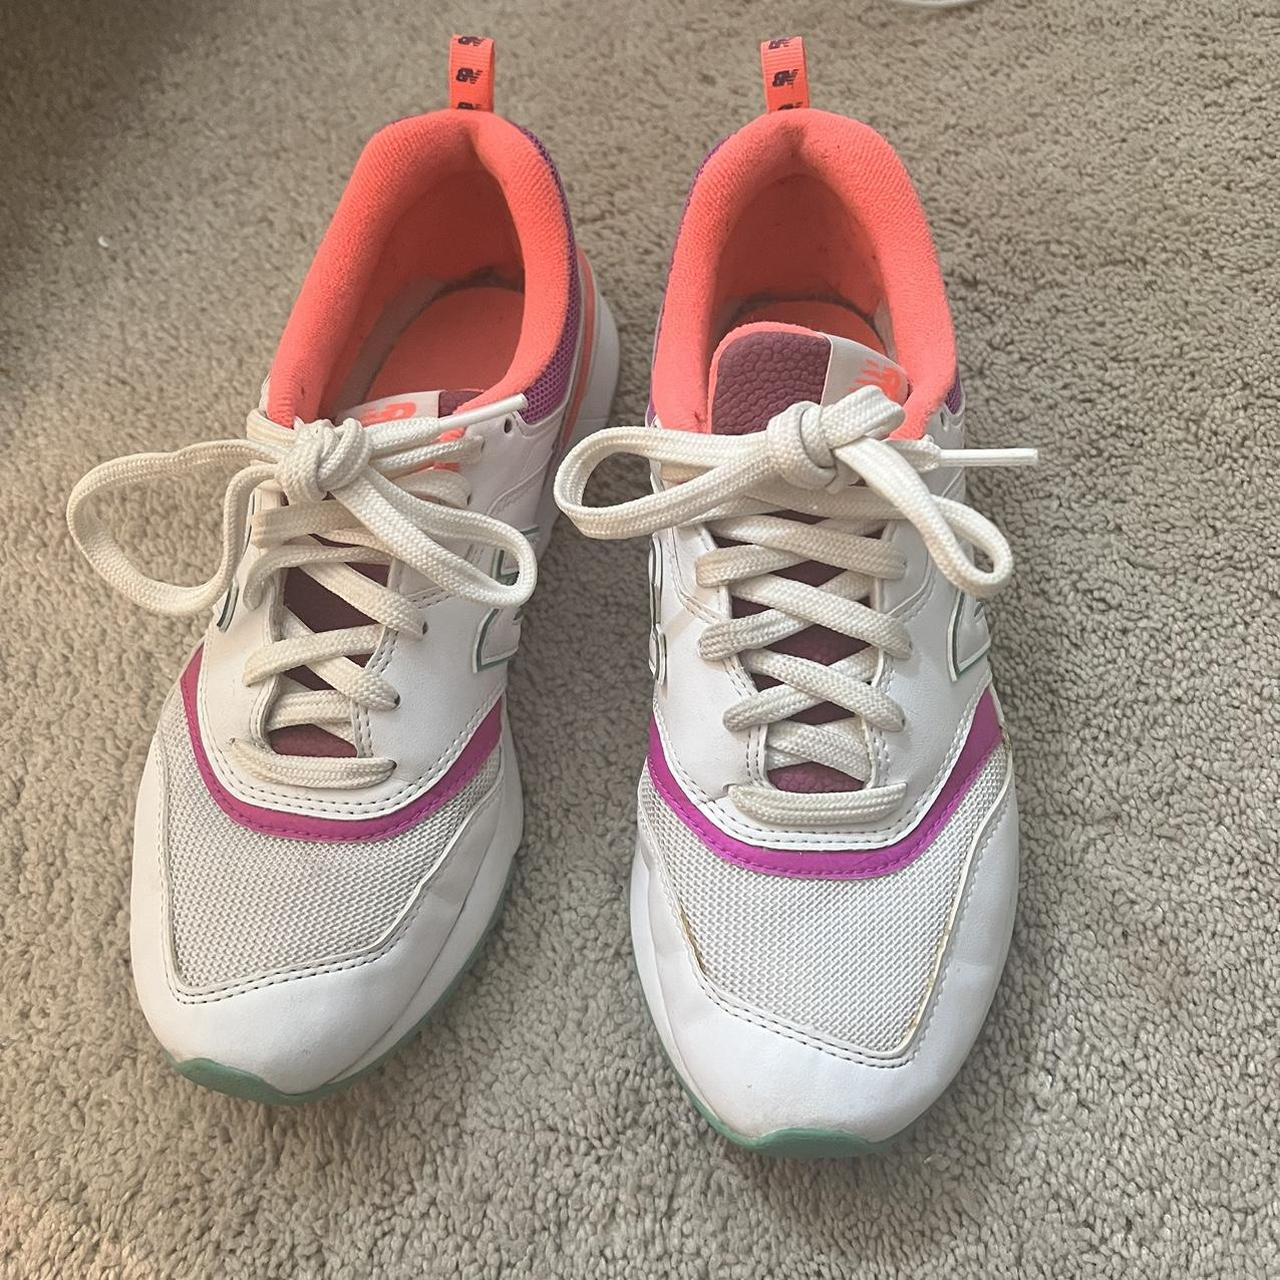 New Balance Women's White and Pink Trainers (3)